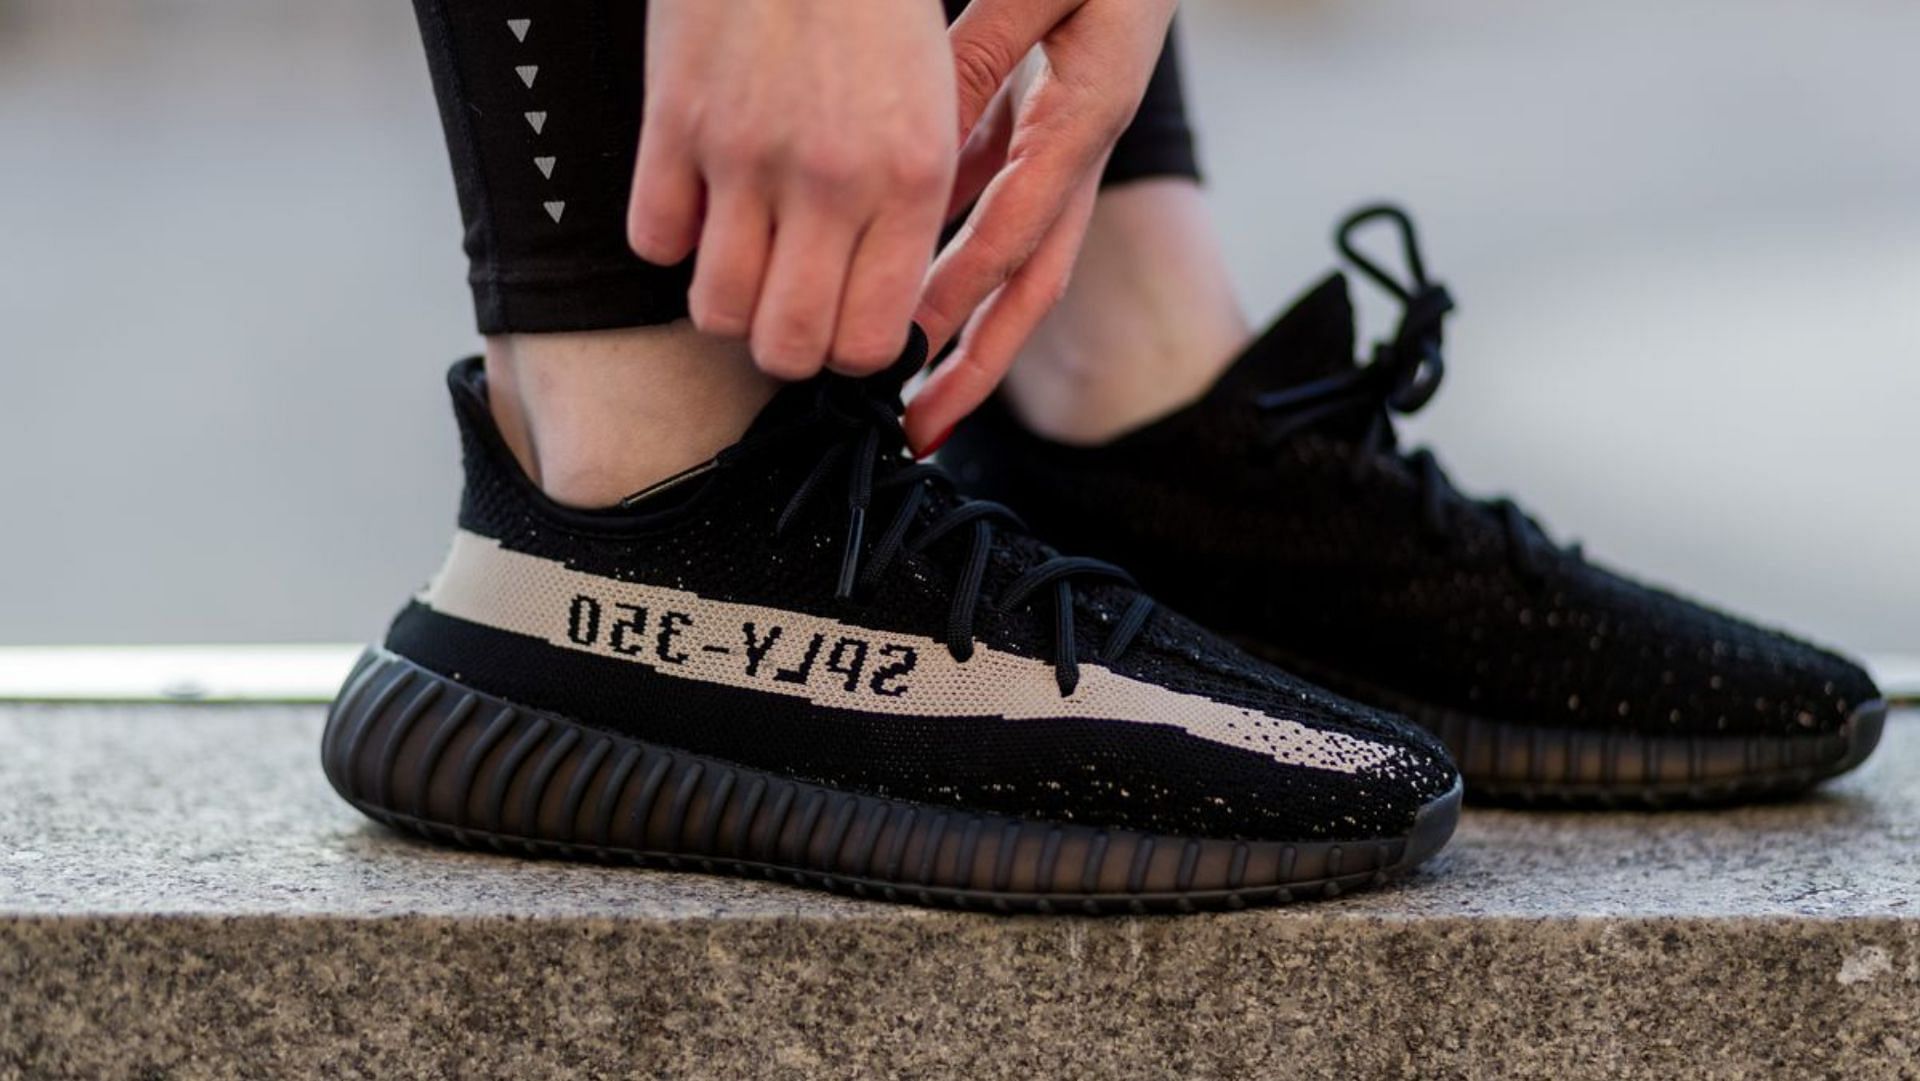 Adidas and Kanye West collaborated for Yeezy in 2015. (Image via Christian Vierig/Getty Images)